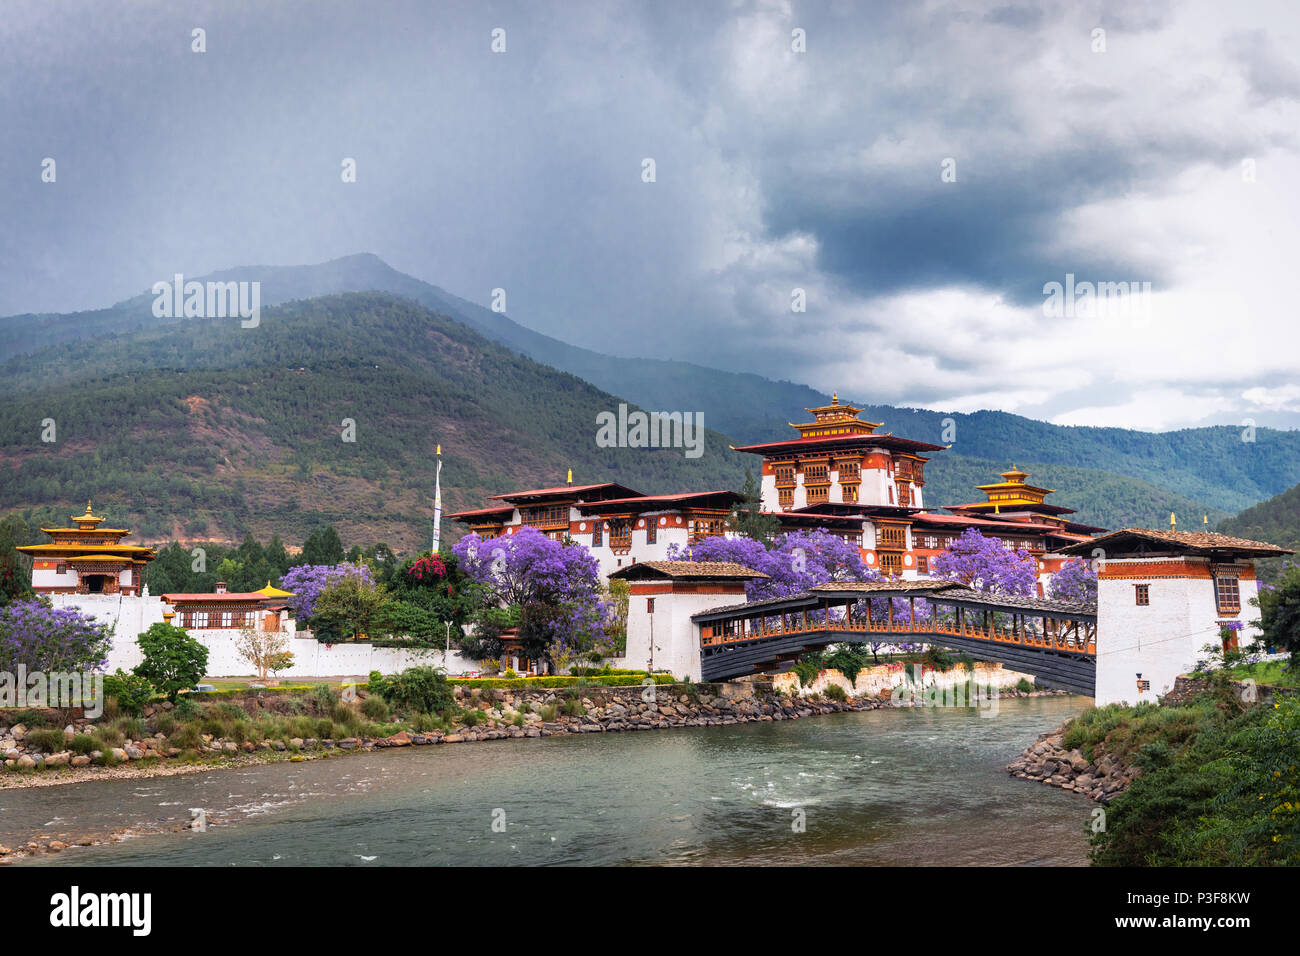 The beautiful Dzong of Punakha shining in the monsoon glory with purple trees to compliment. Stock Photo